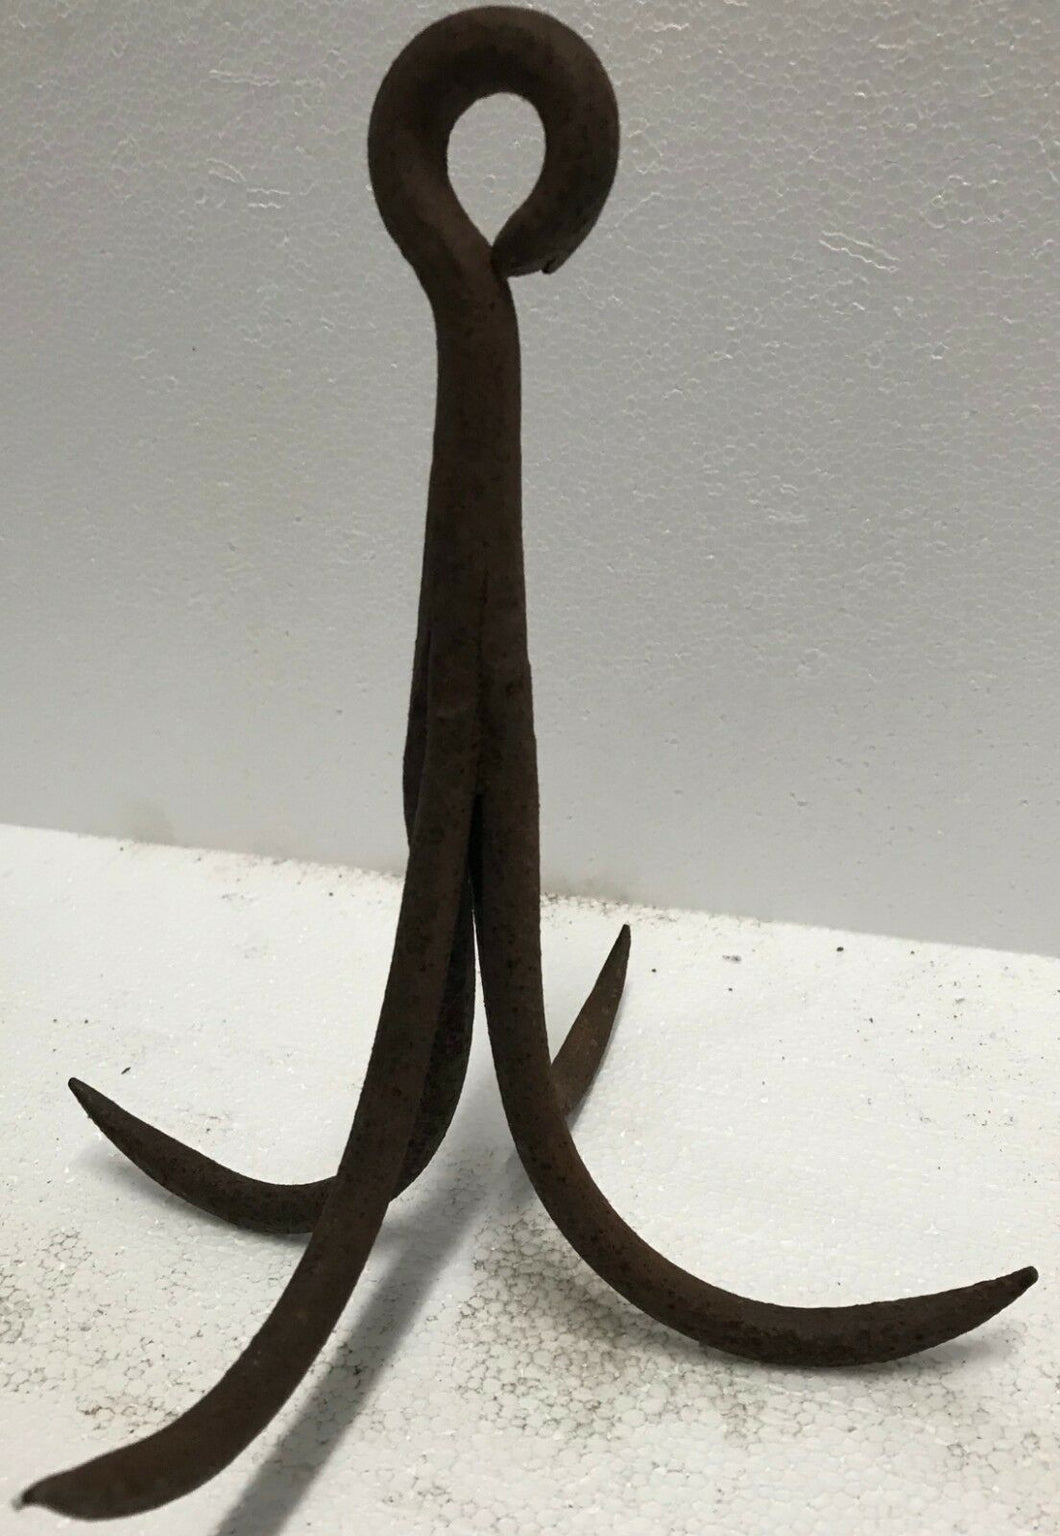 EARLY 19TH C. CAST IRON 4 PRONG GAME HOOK - KITCHEN IRON